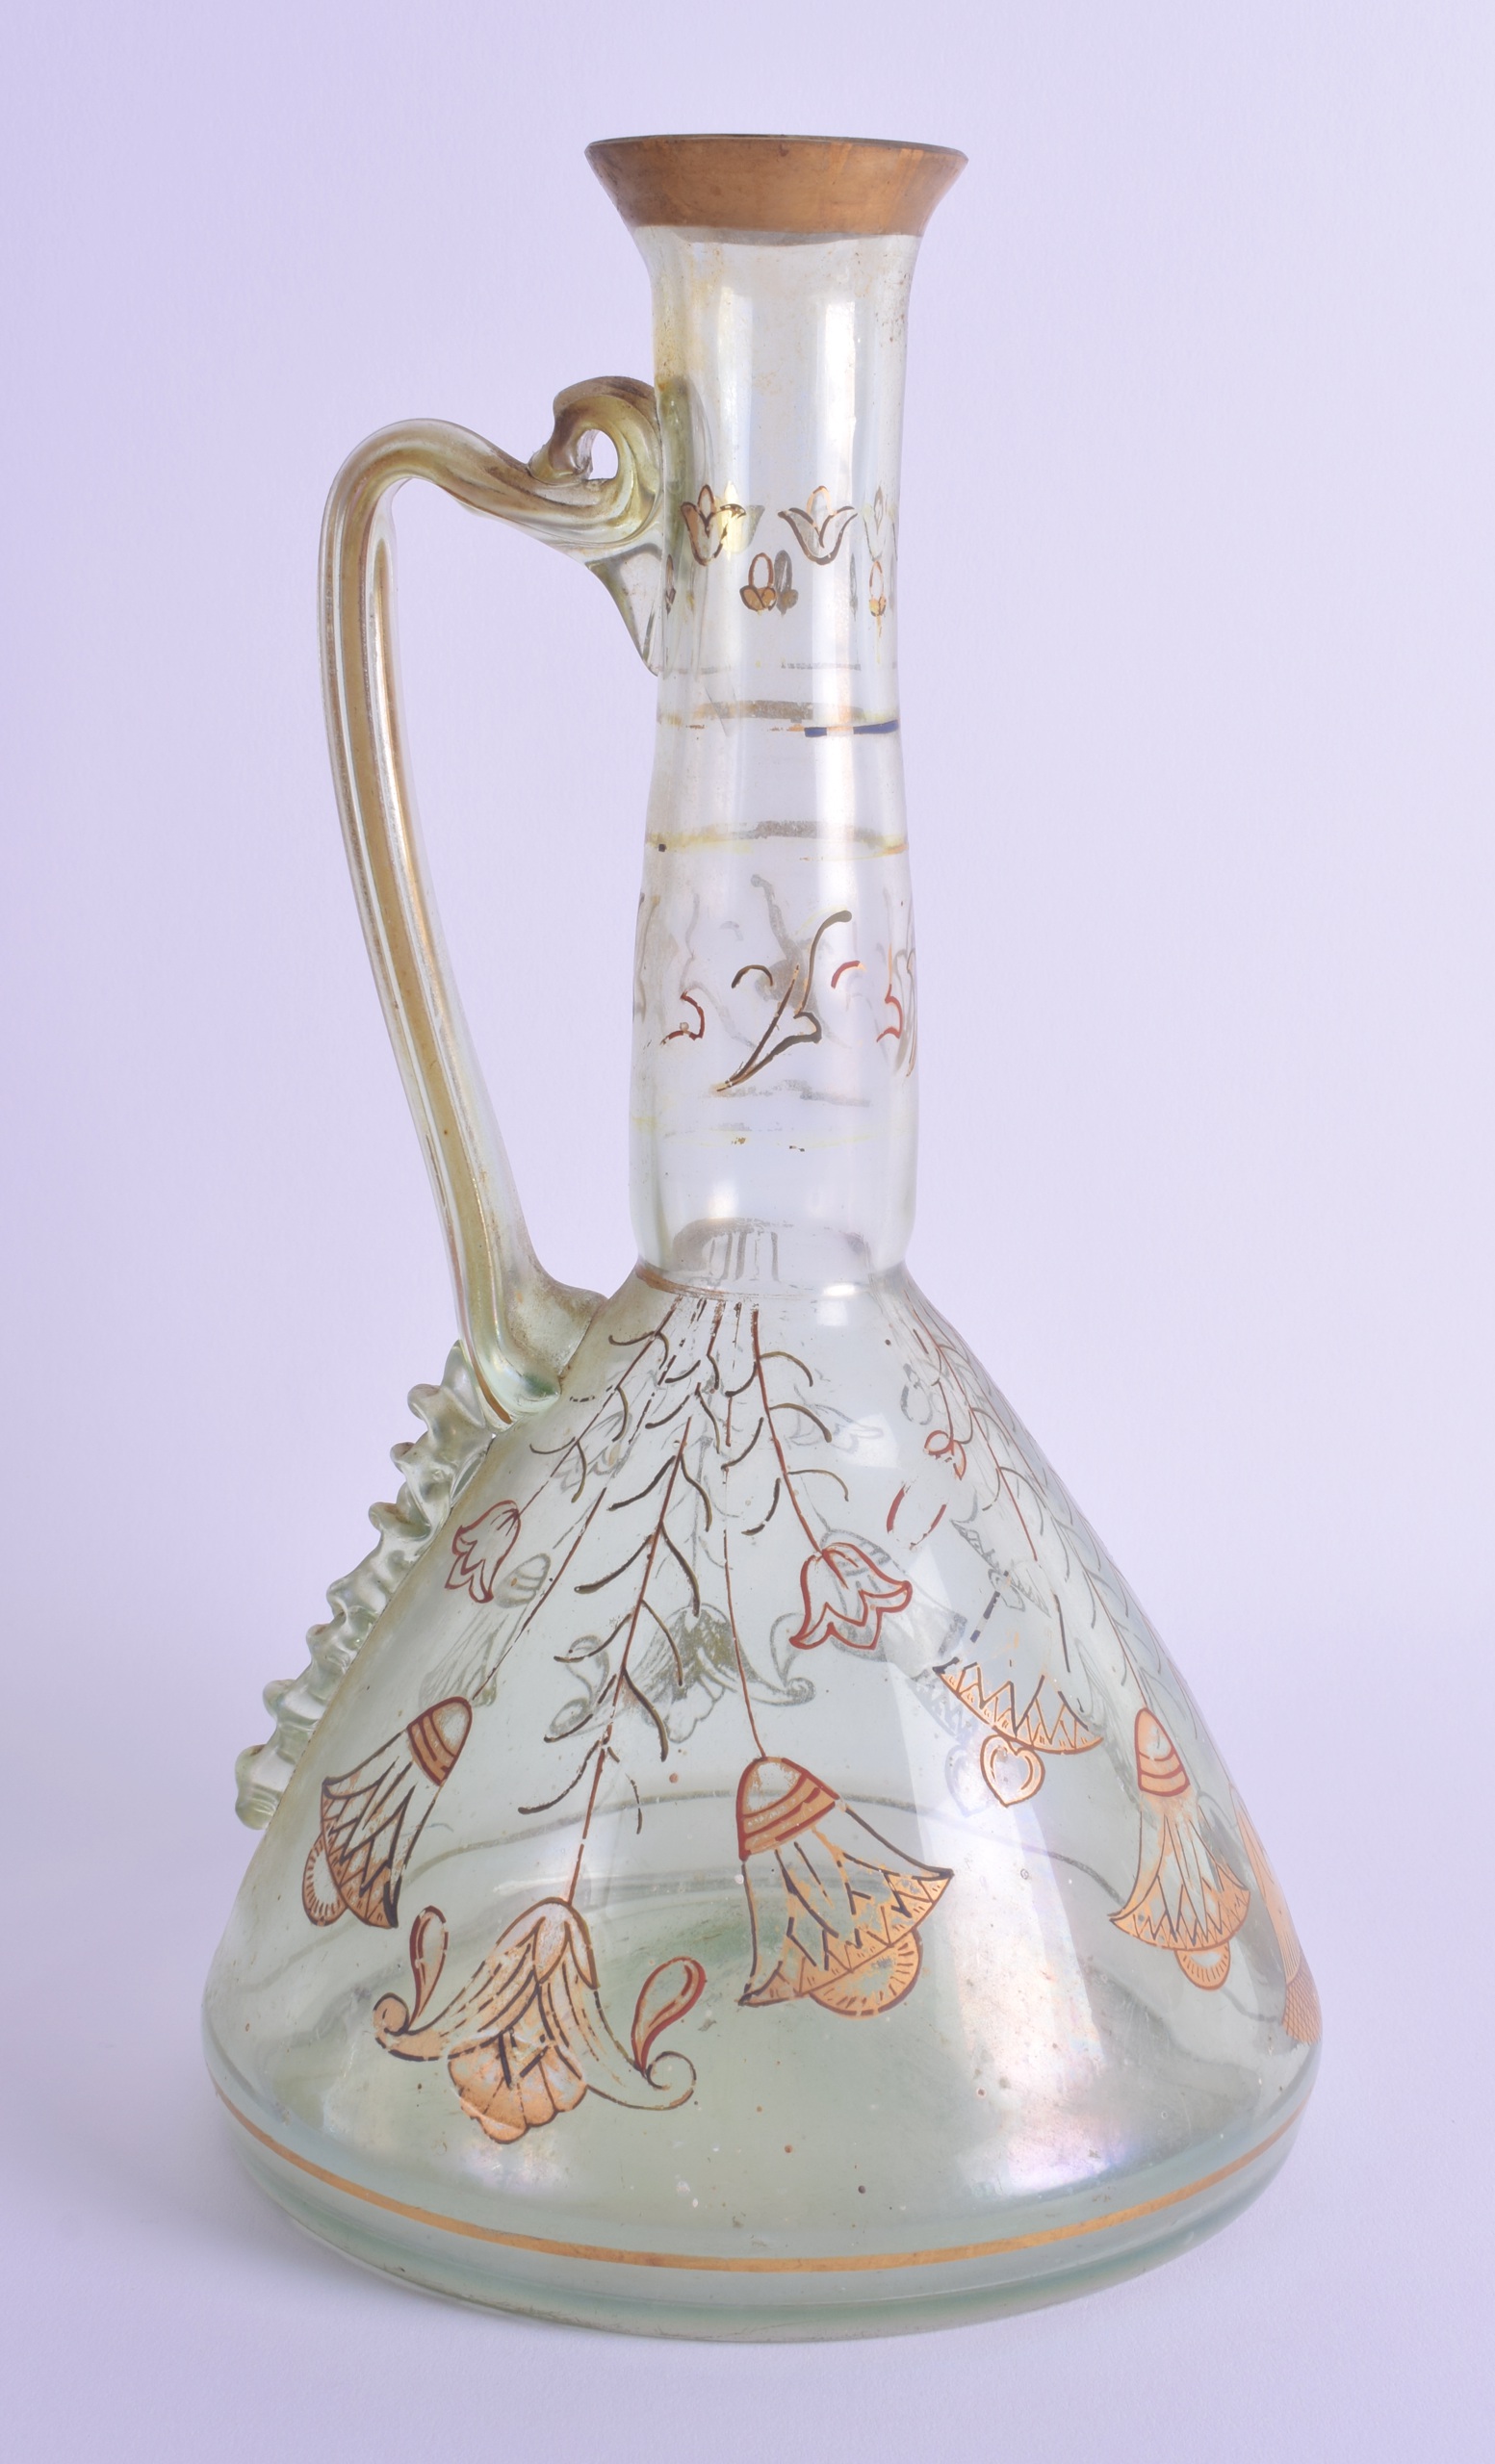 AN ART NOUVEAU GERMAN FRITZ HECKERT ENAMELLED GLASS EWER C1890 painted with swags and floral sprays. - Image 2 of 2